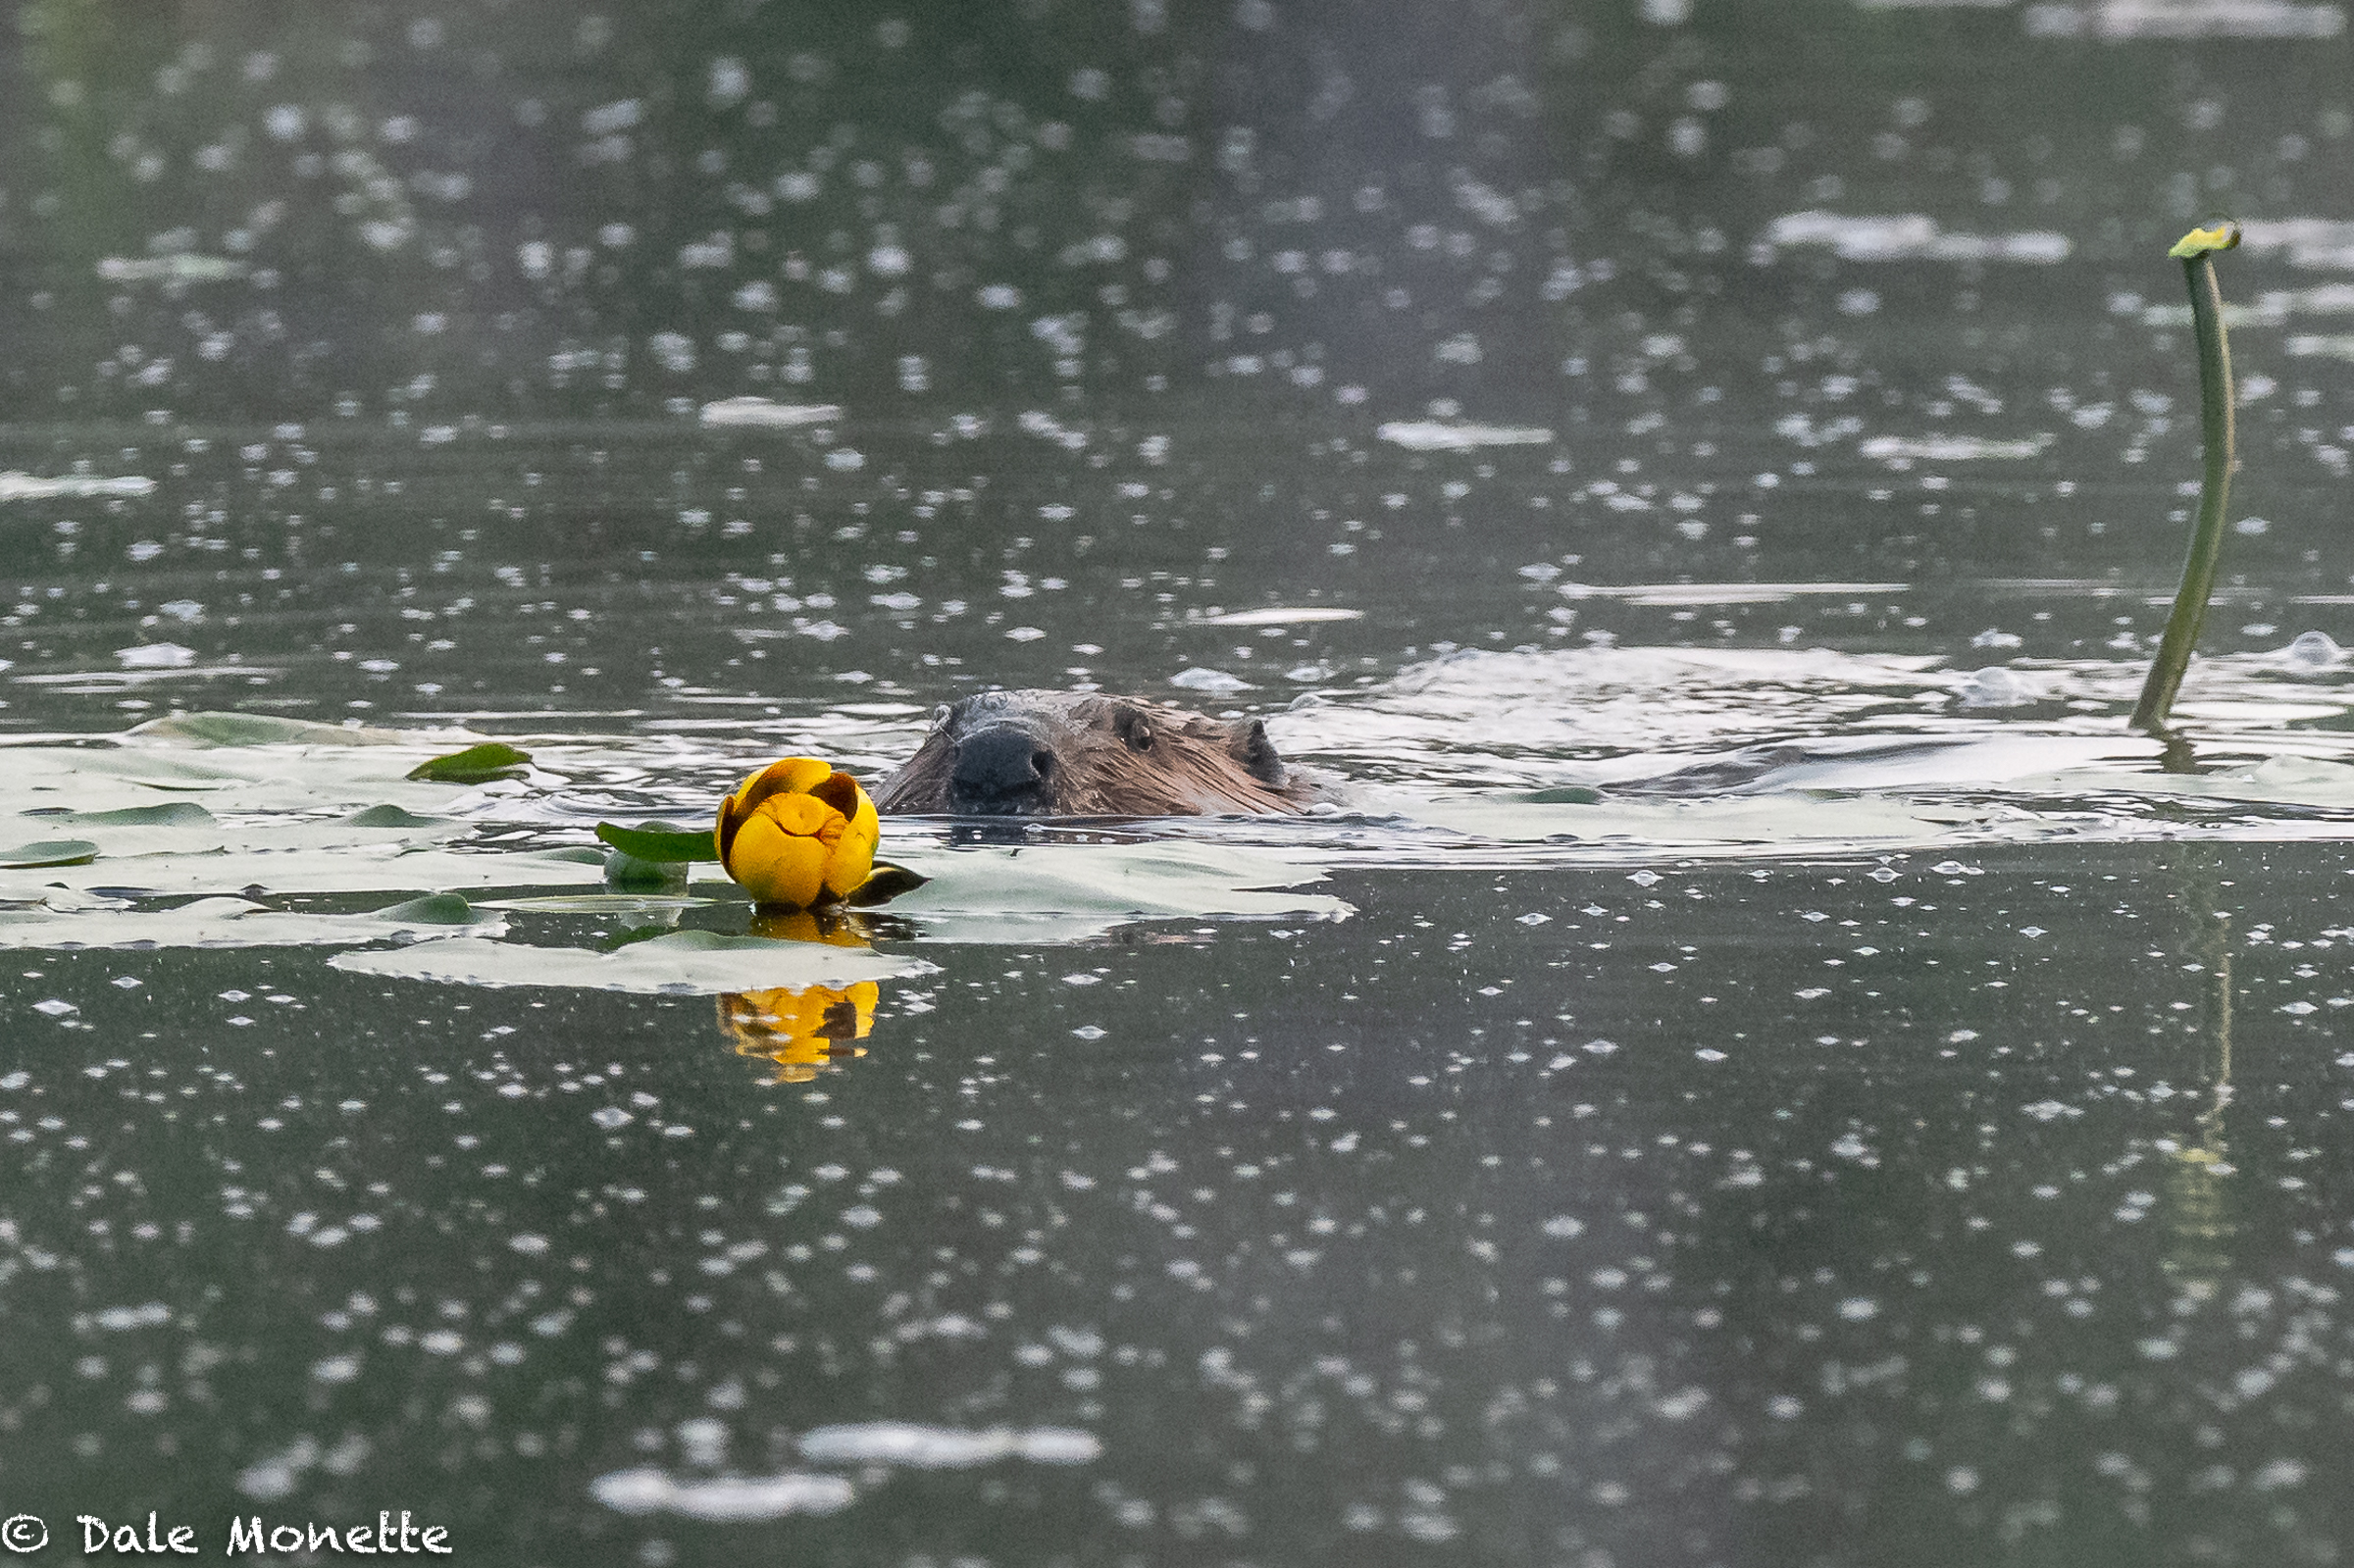   This beaver was eating water Lillies this morning before he hit the lodge for the day. He cleaned out one full patch in the pond   You can see the stem of the one he just finished to the right.  